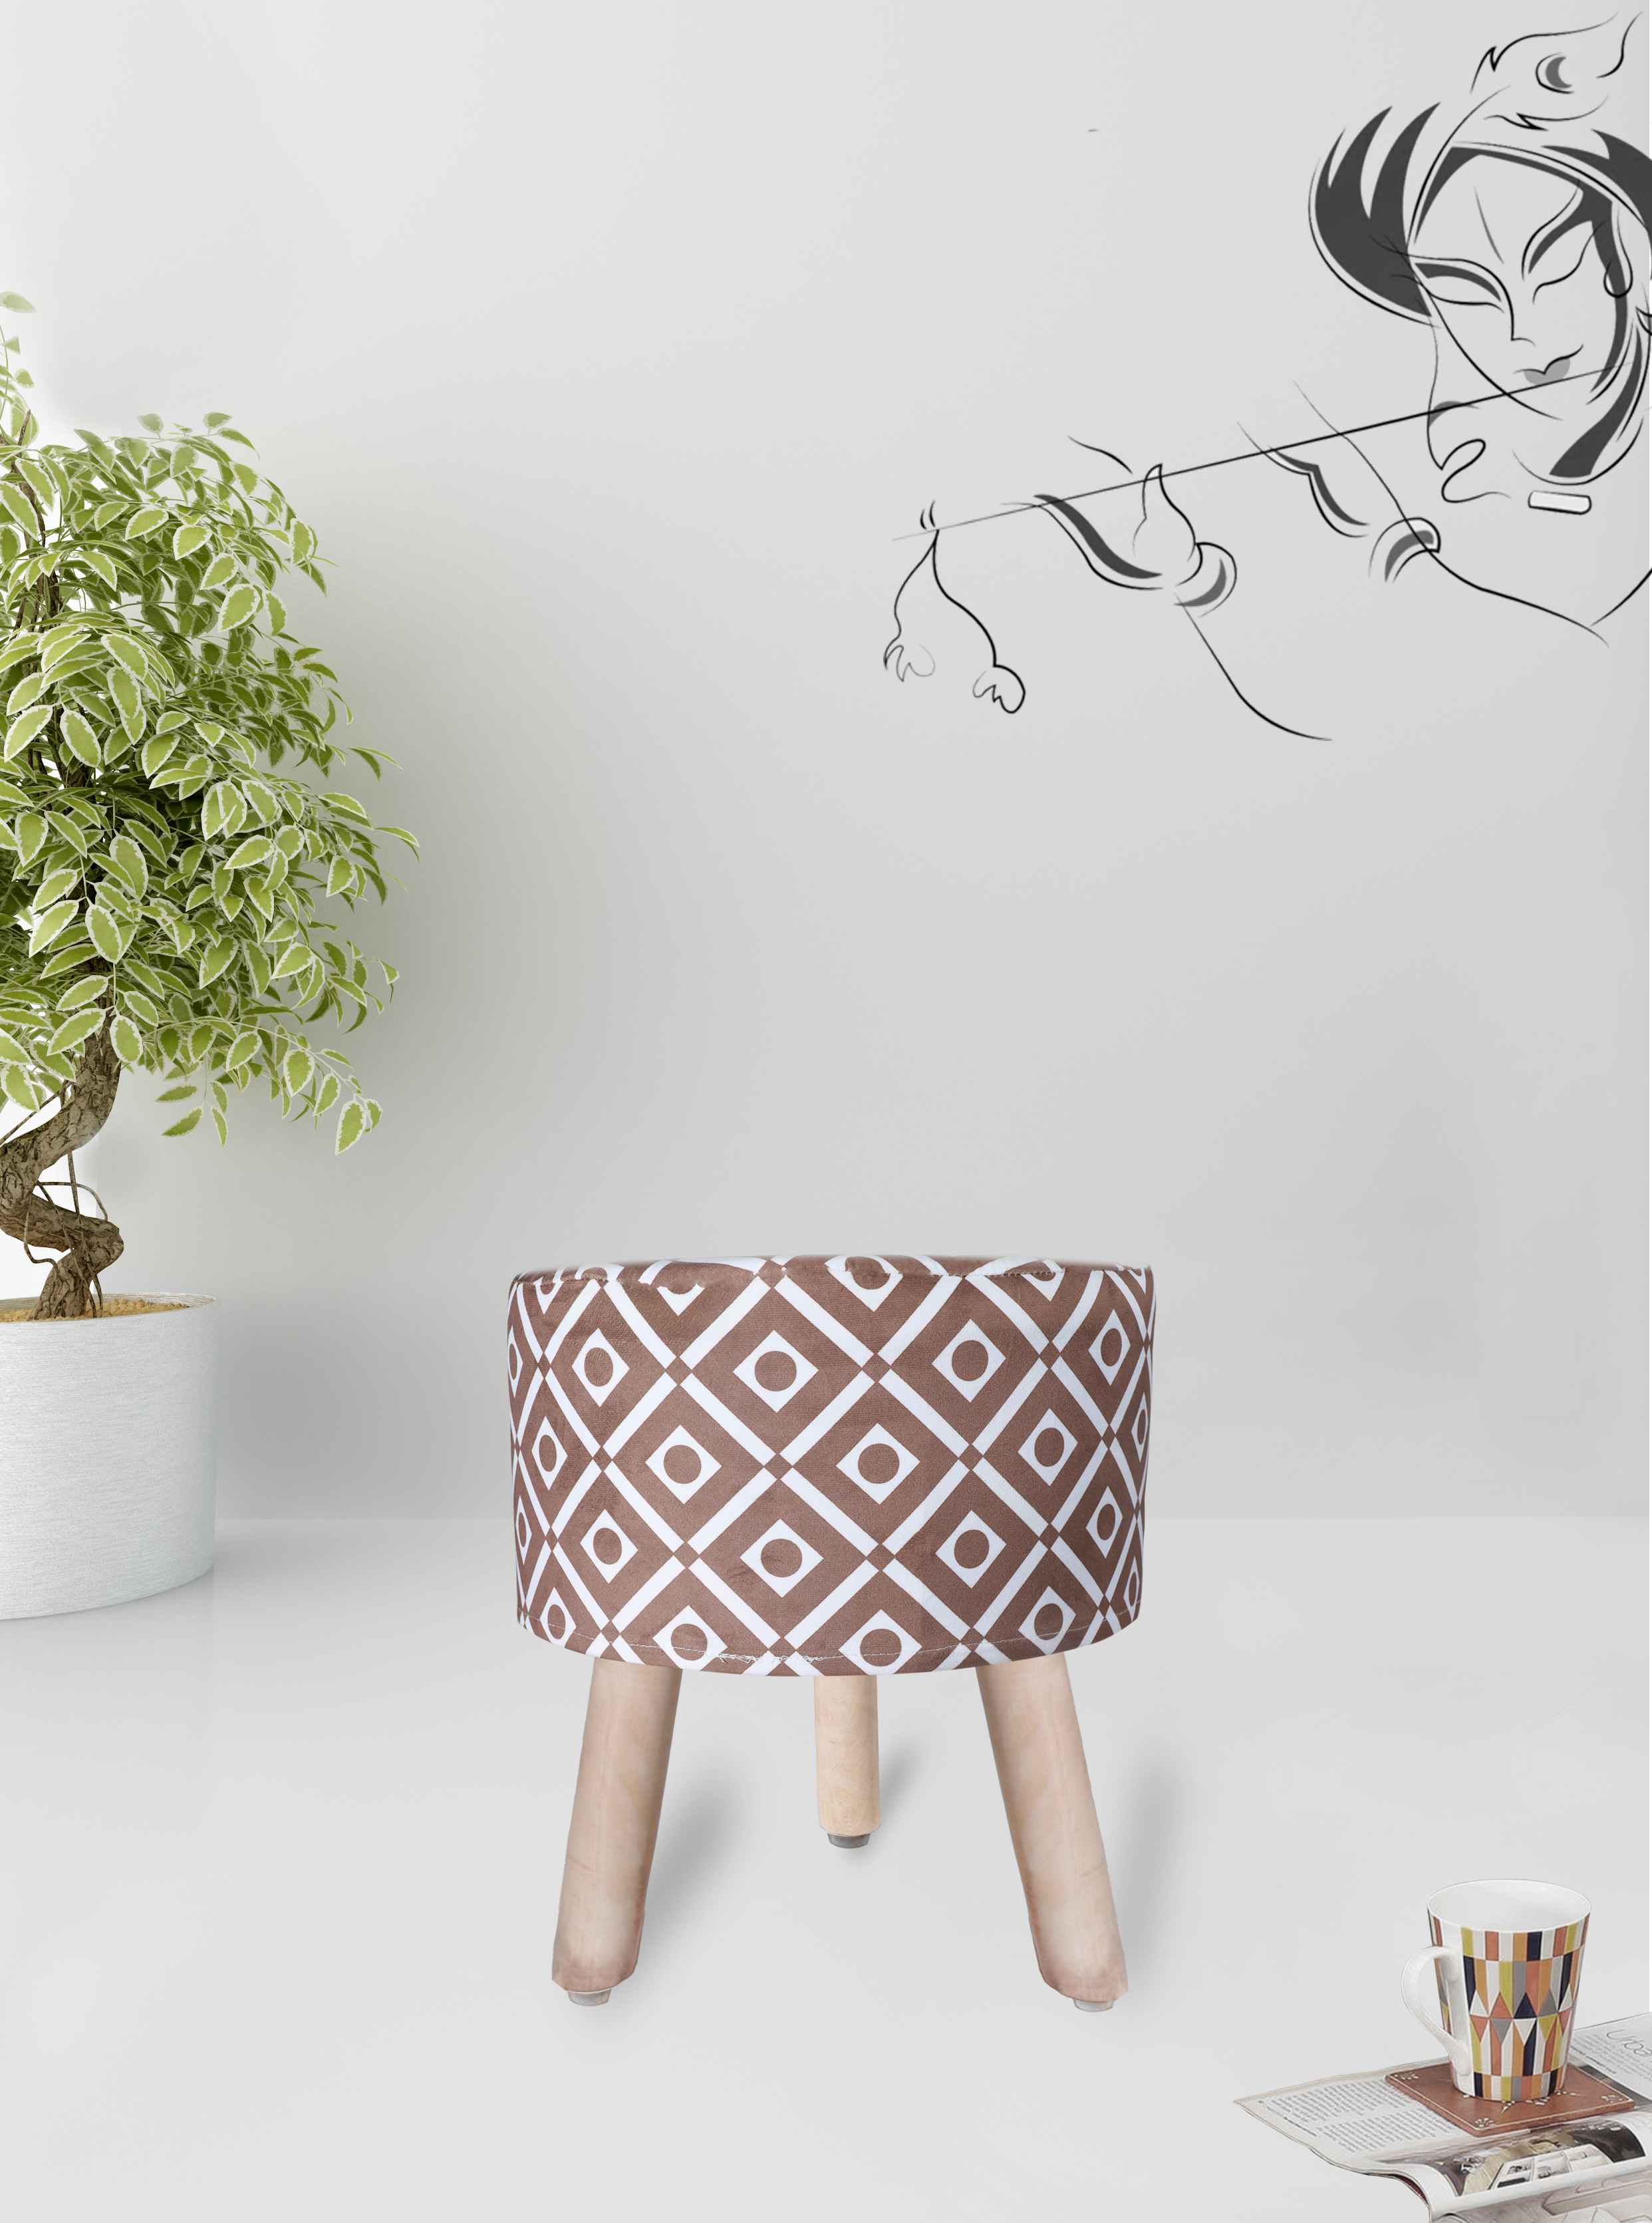 Patterned Paragon Ottomans 10